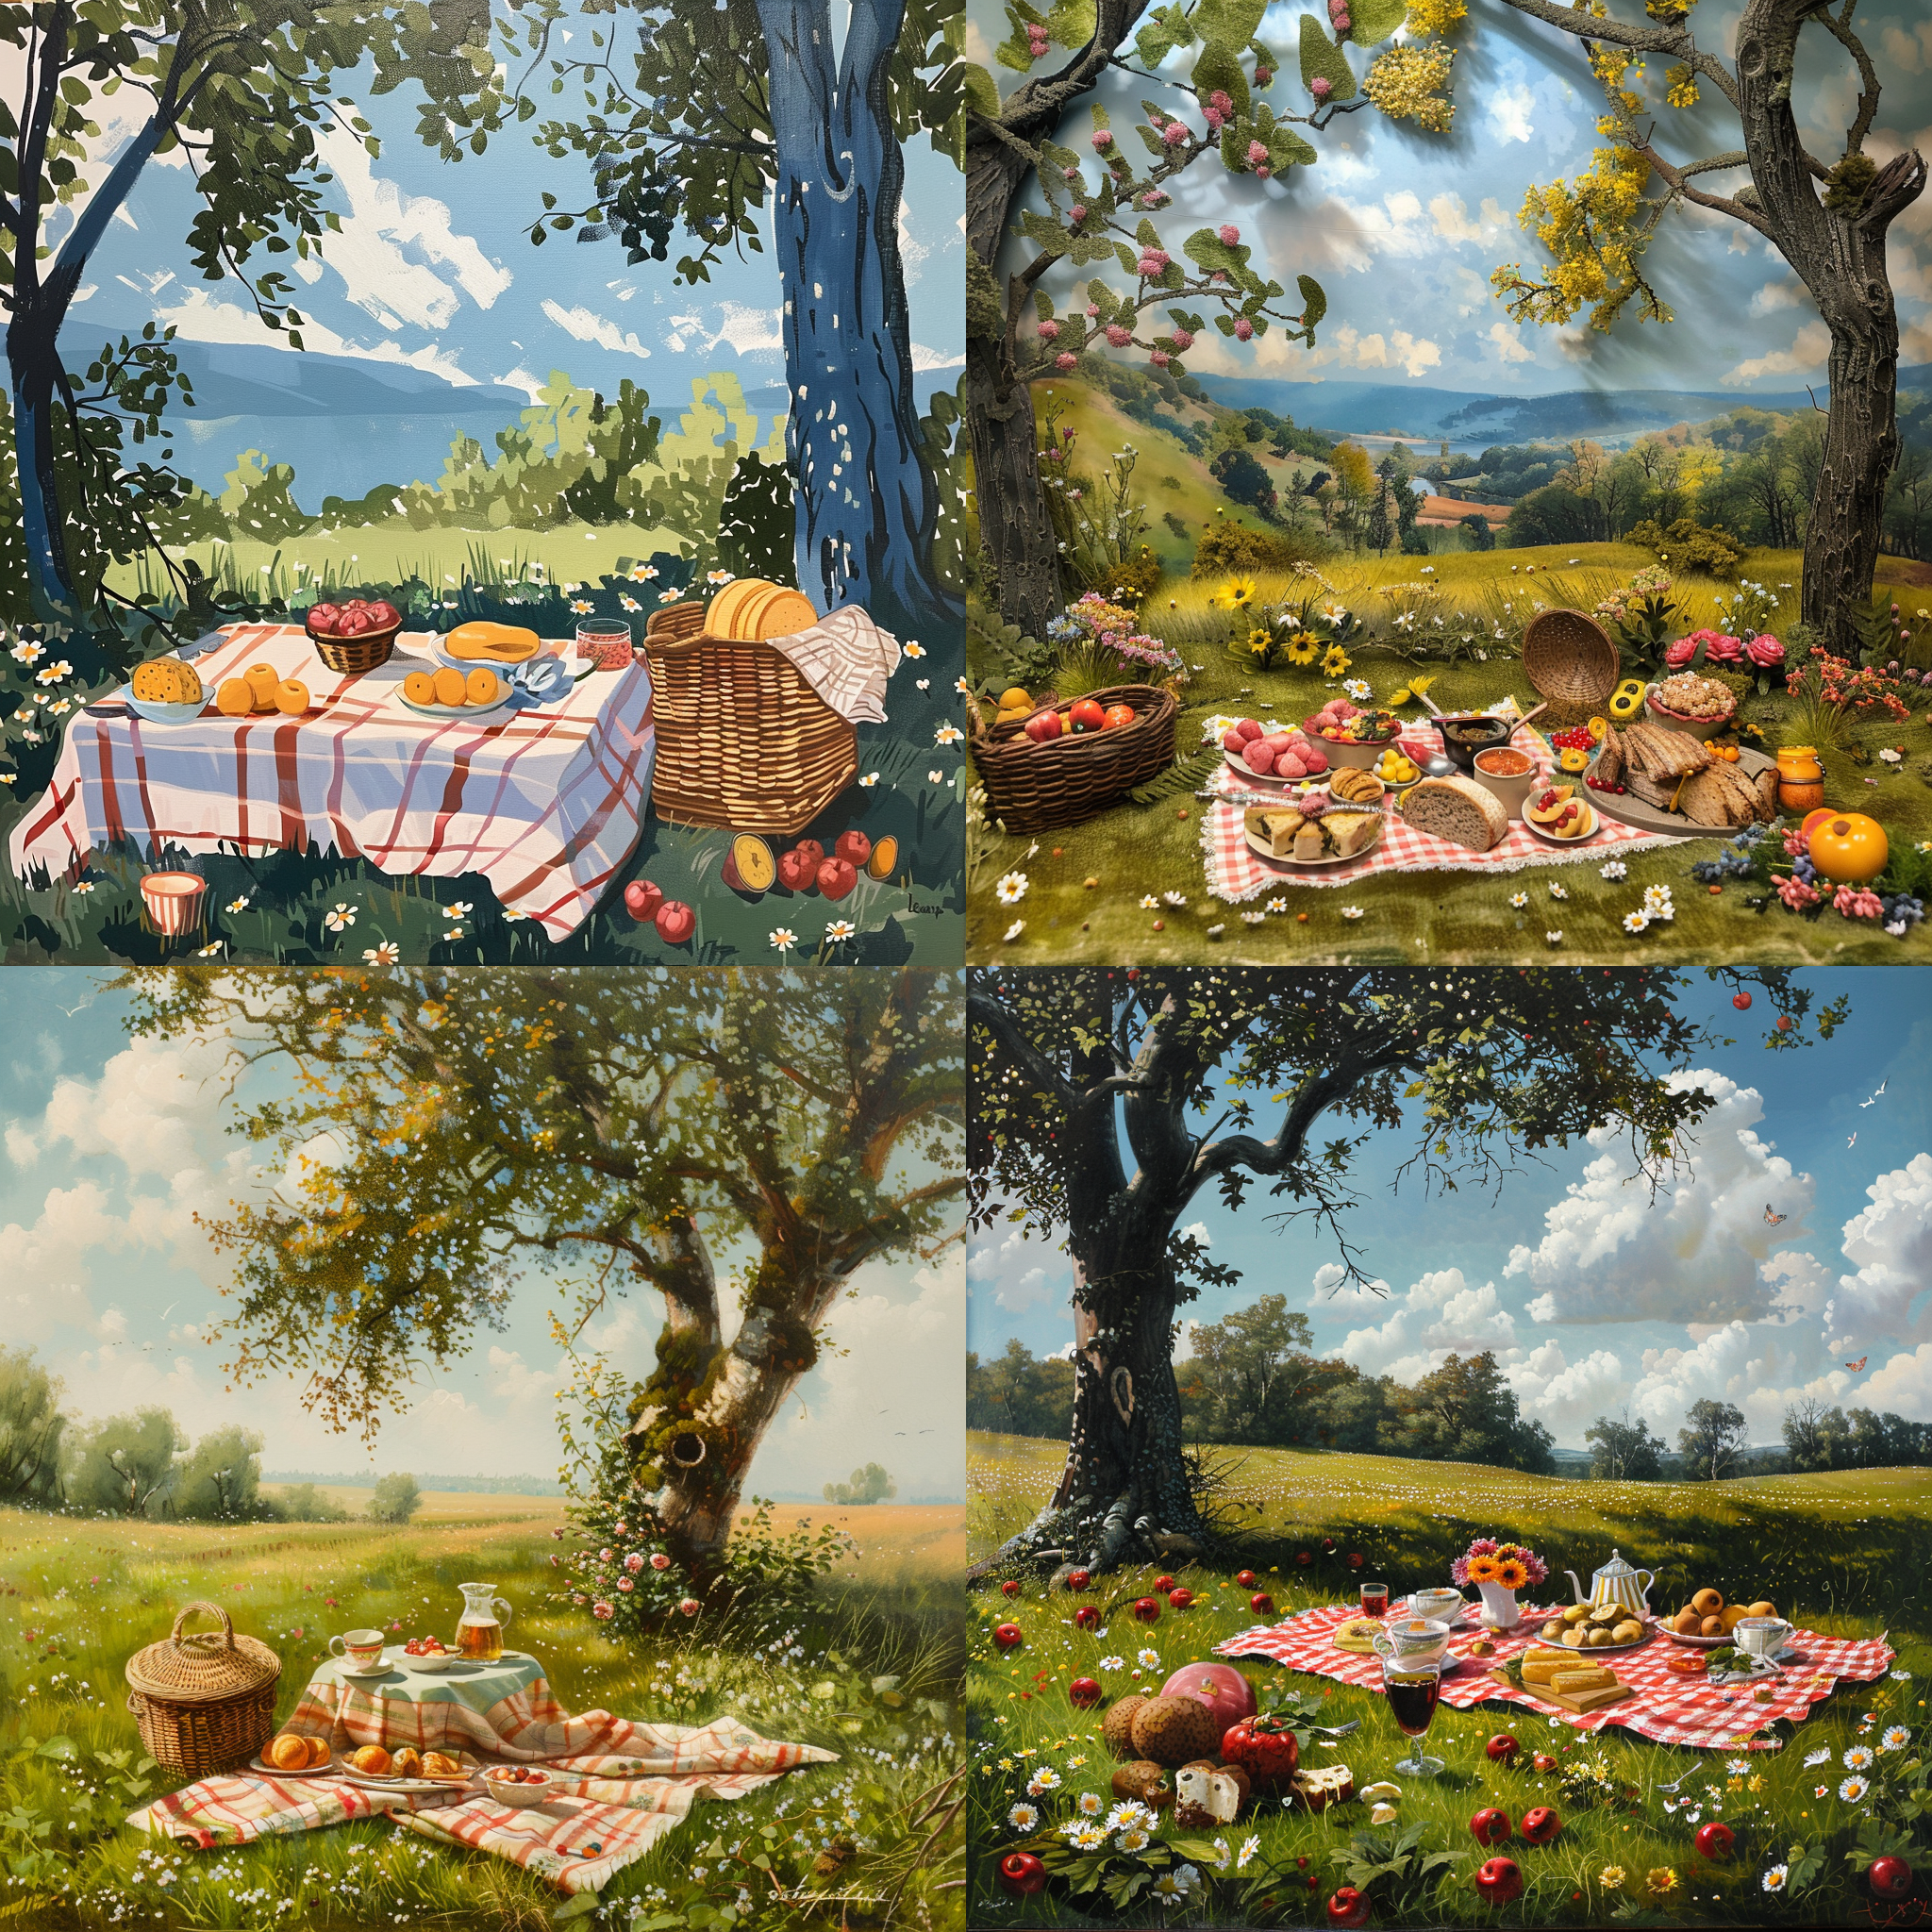 Midjourney image of a picnic scene that ignores the prompt asking to generate without trees